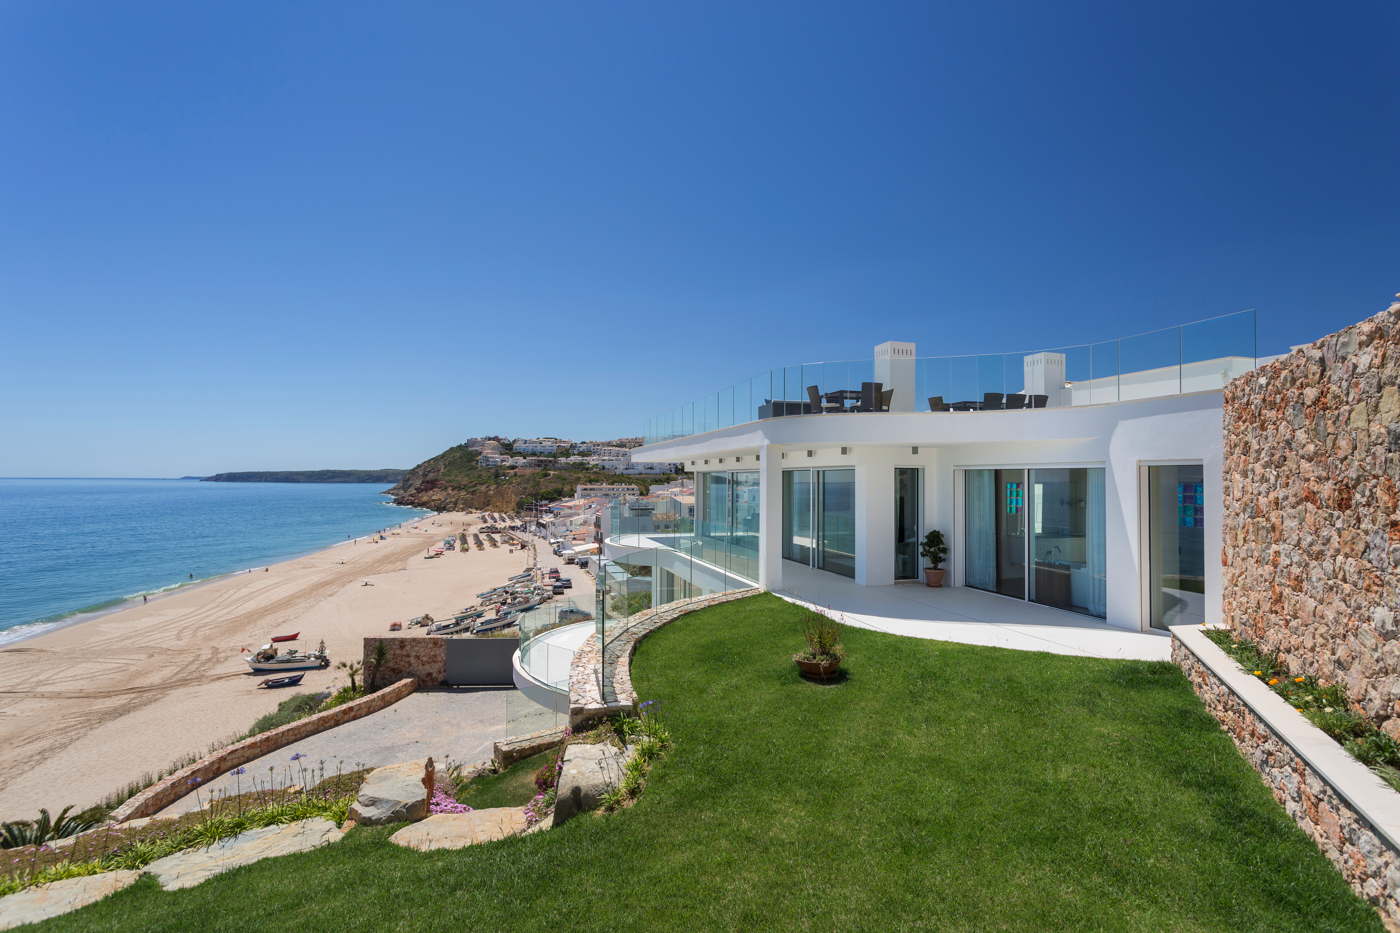 Oceanfront holiday villa with private pool direct beach access Algarve Portugal